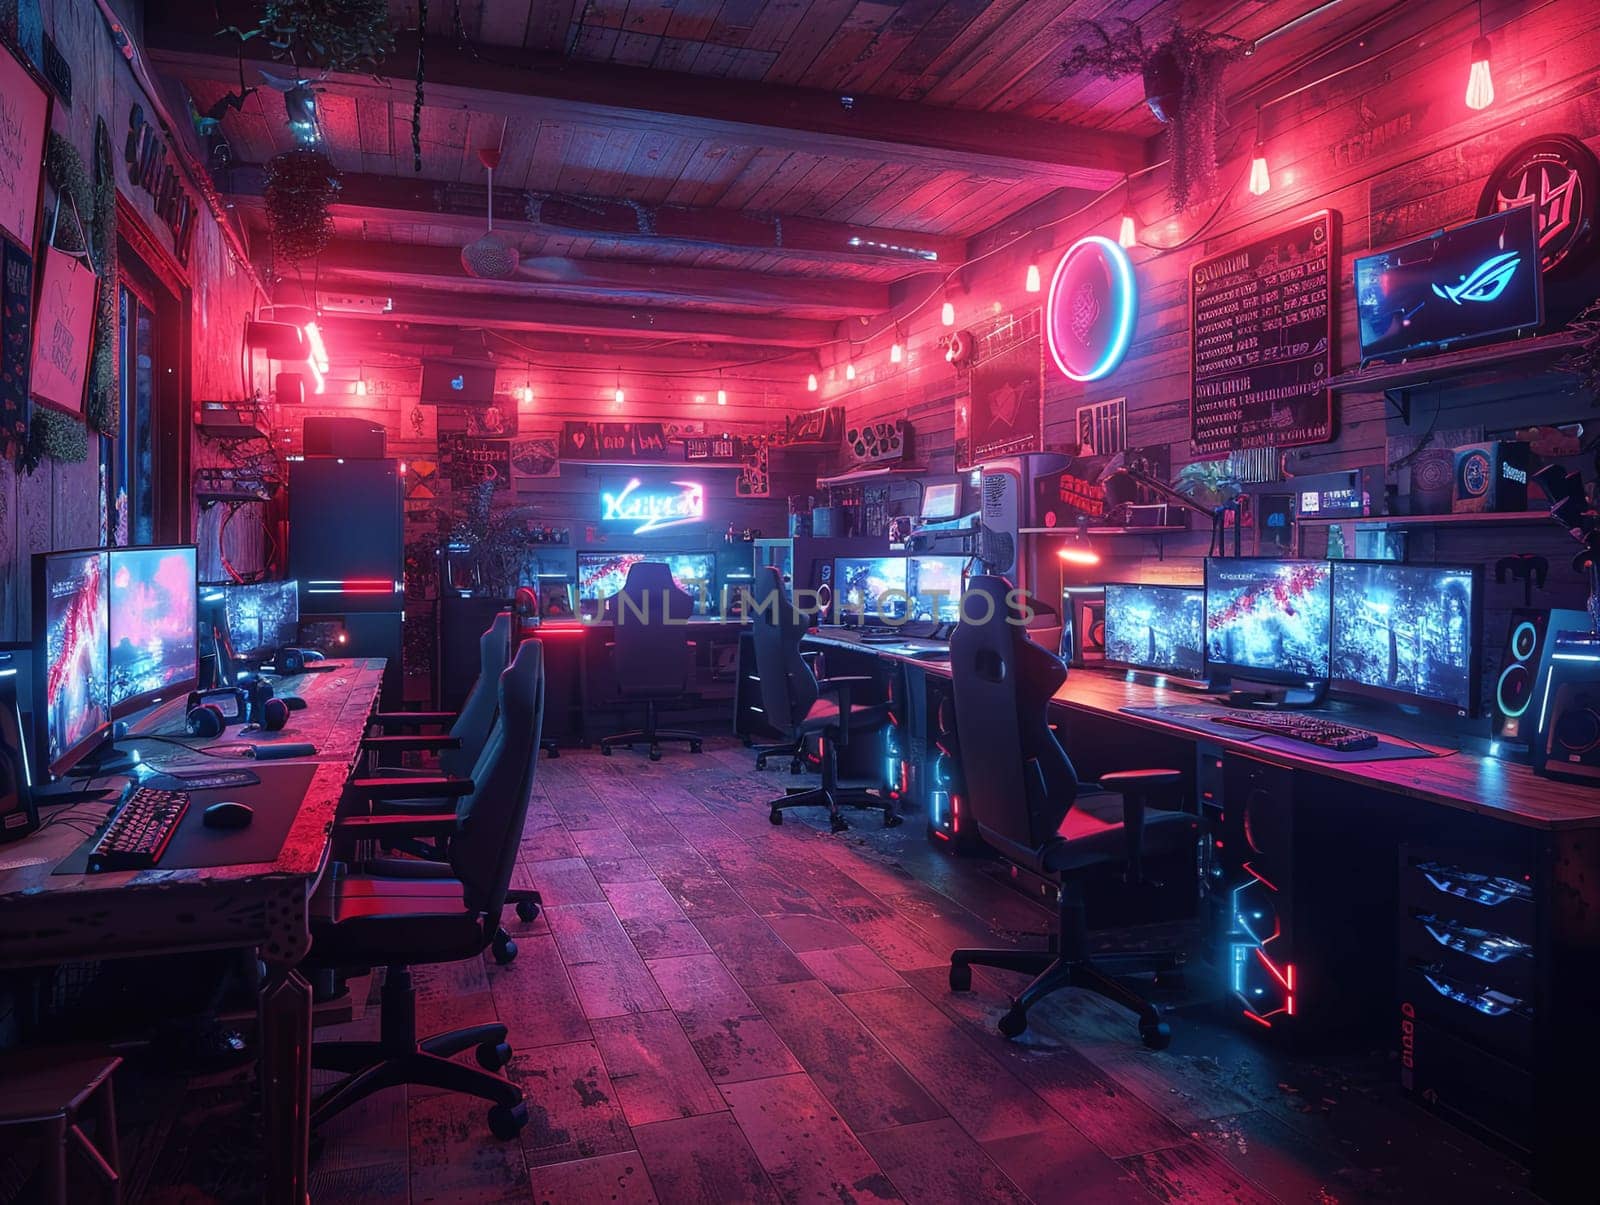 Cyberpunk gaming den with neon lights and high-tech setups by Benzoix